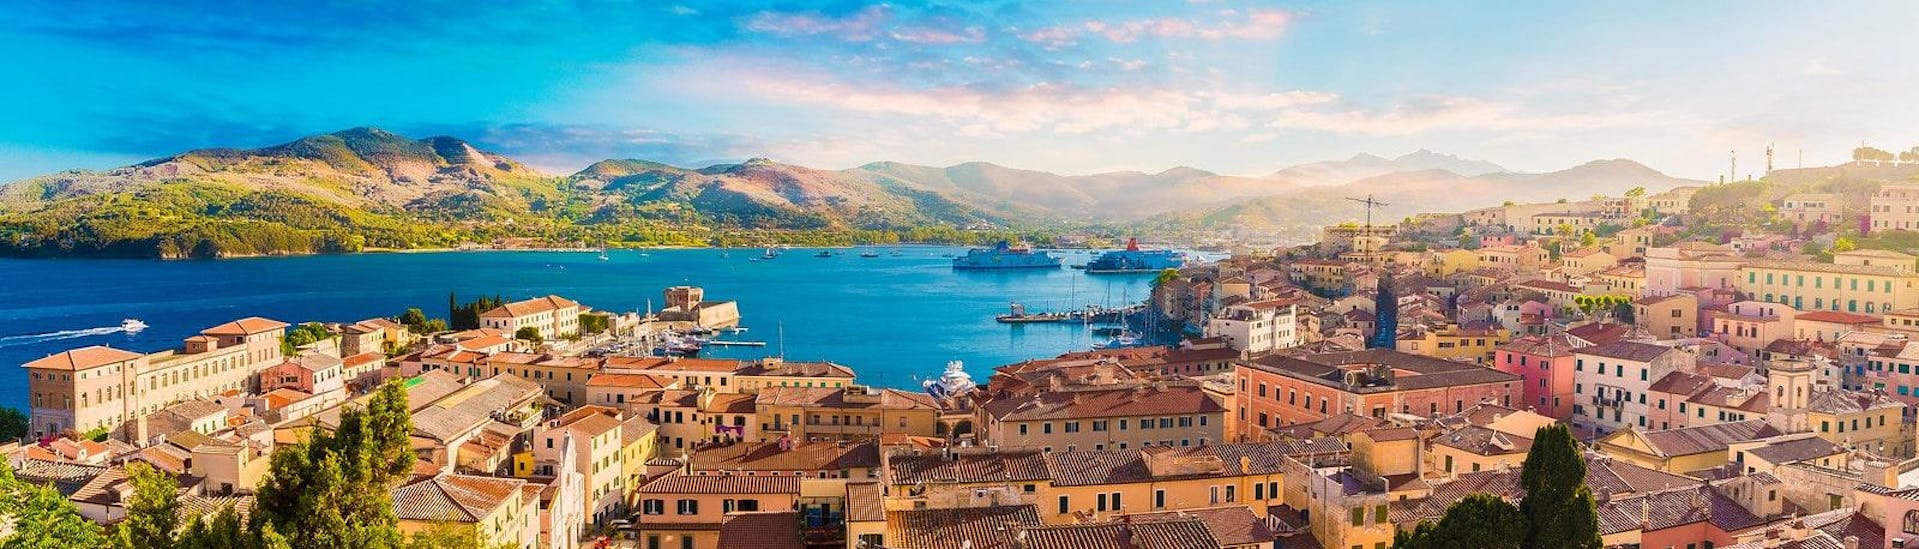 Beautiful view of the Old town and harbor Portoferraio, Elba island, Italy.